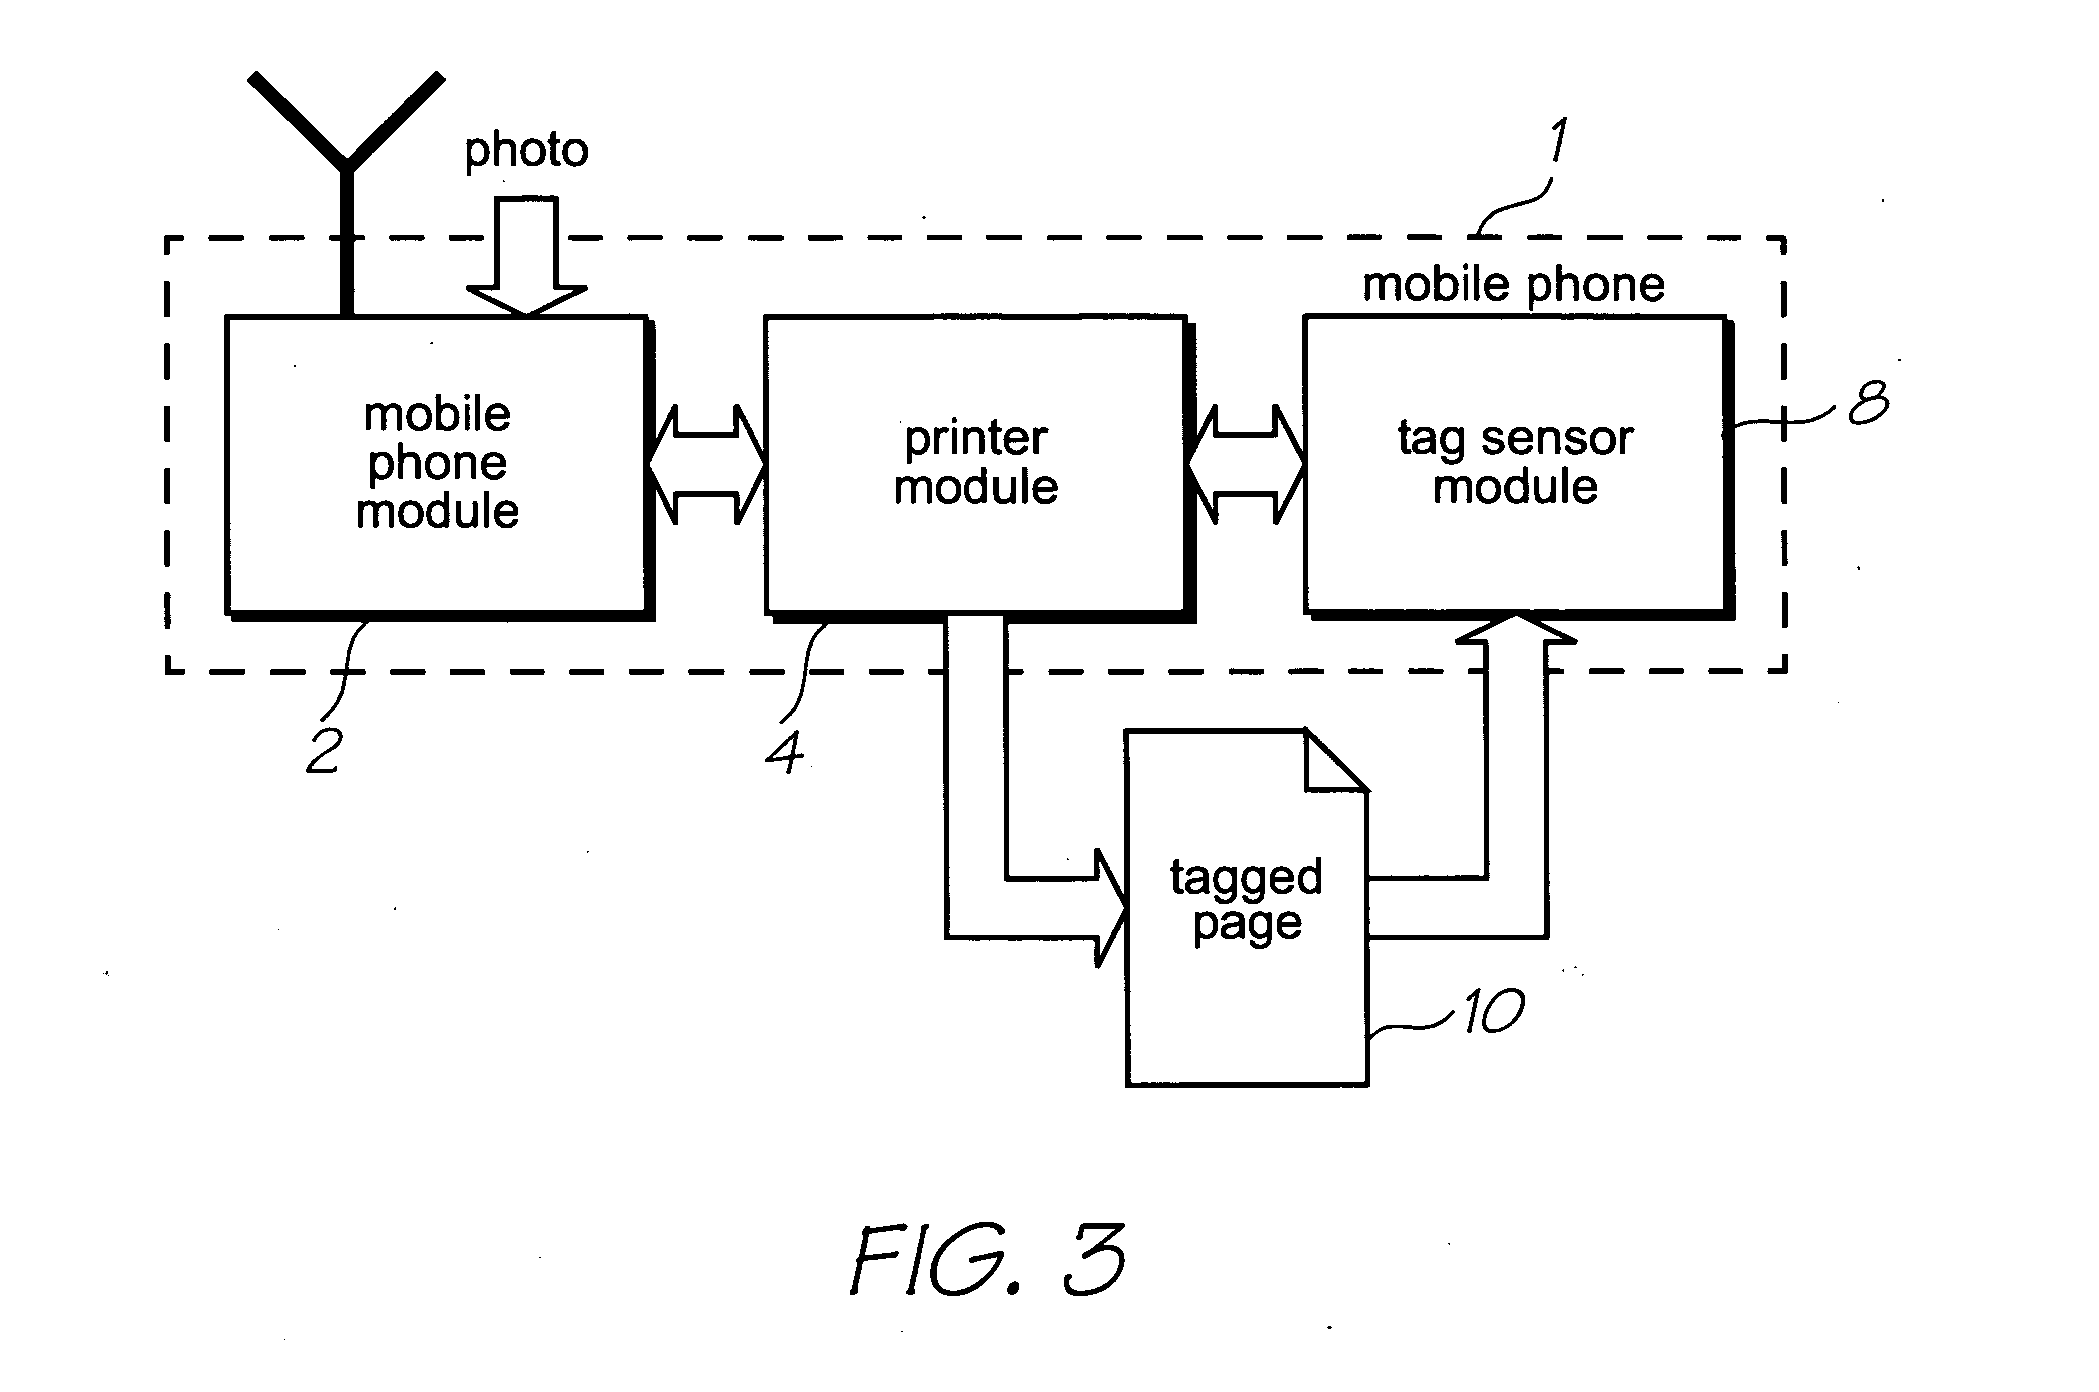 Mobile telecommunication device with a printhead and single media feed roller